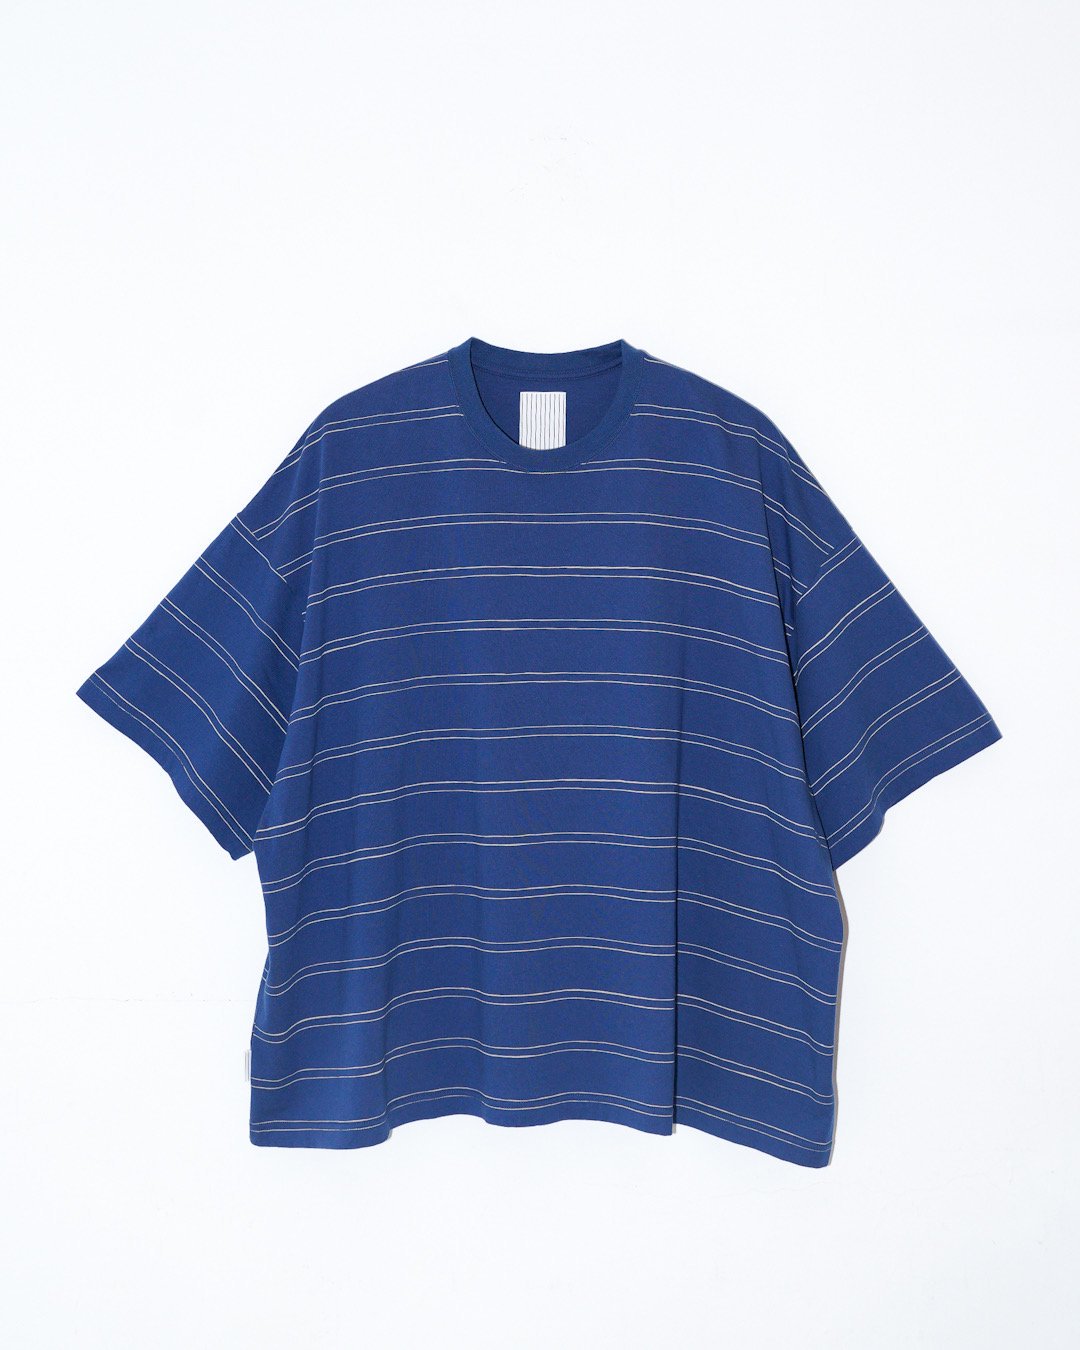 STRIPES FOR CREATIVEDOUBLE SIDE STRIPE TEE